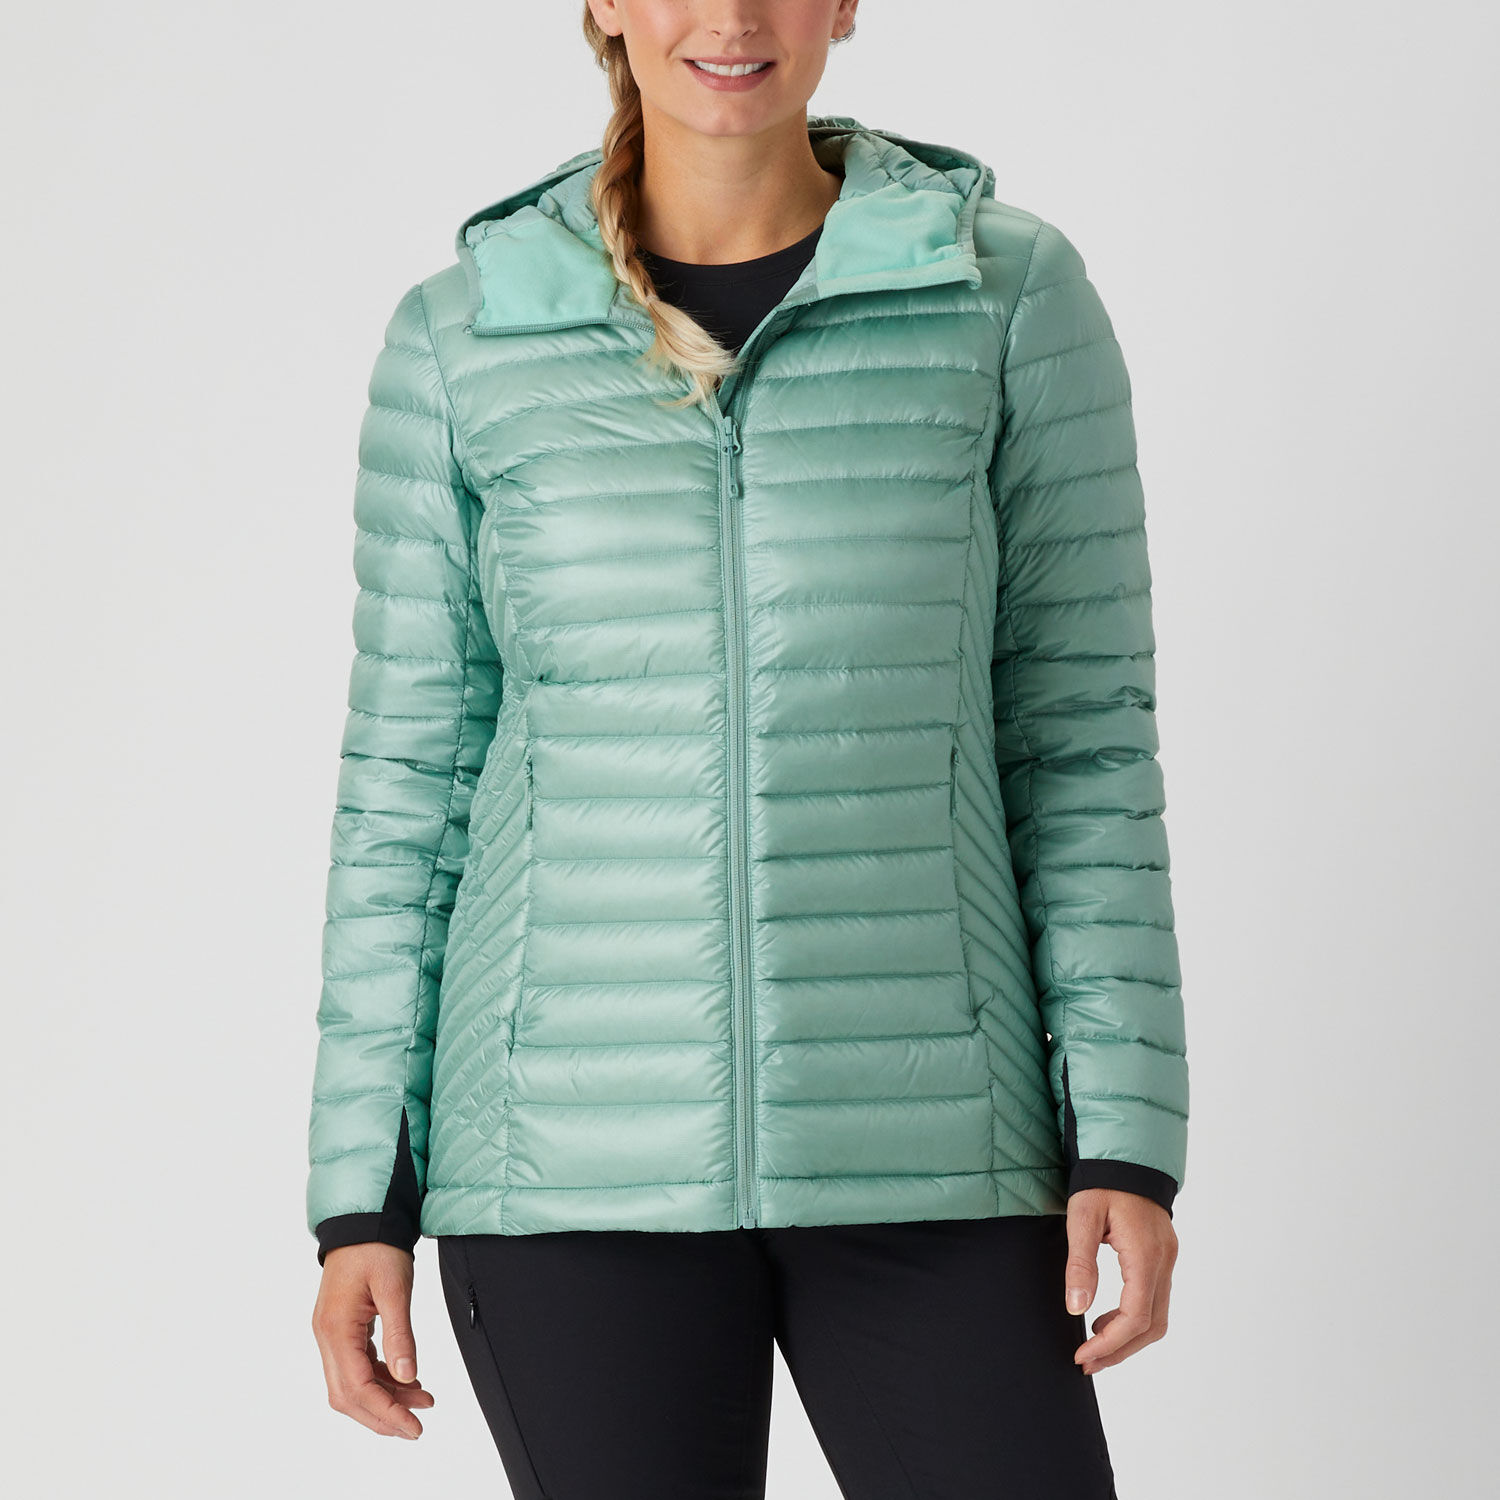 Women's Down Right Jacket | Duluth Trading Company